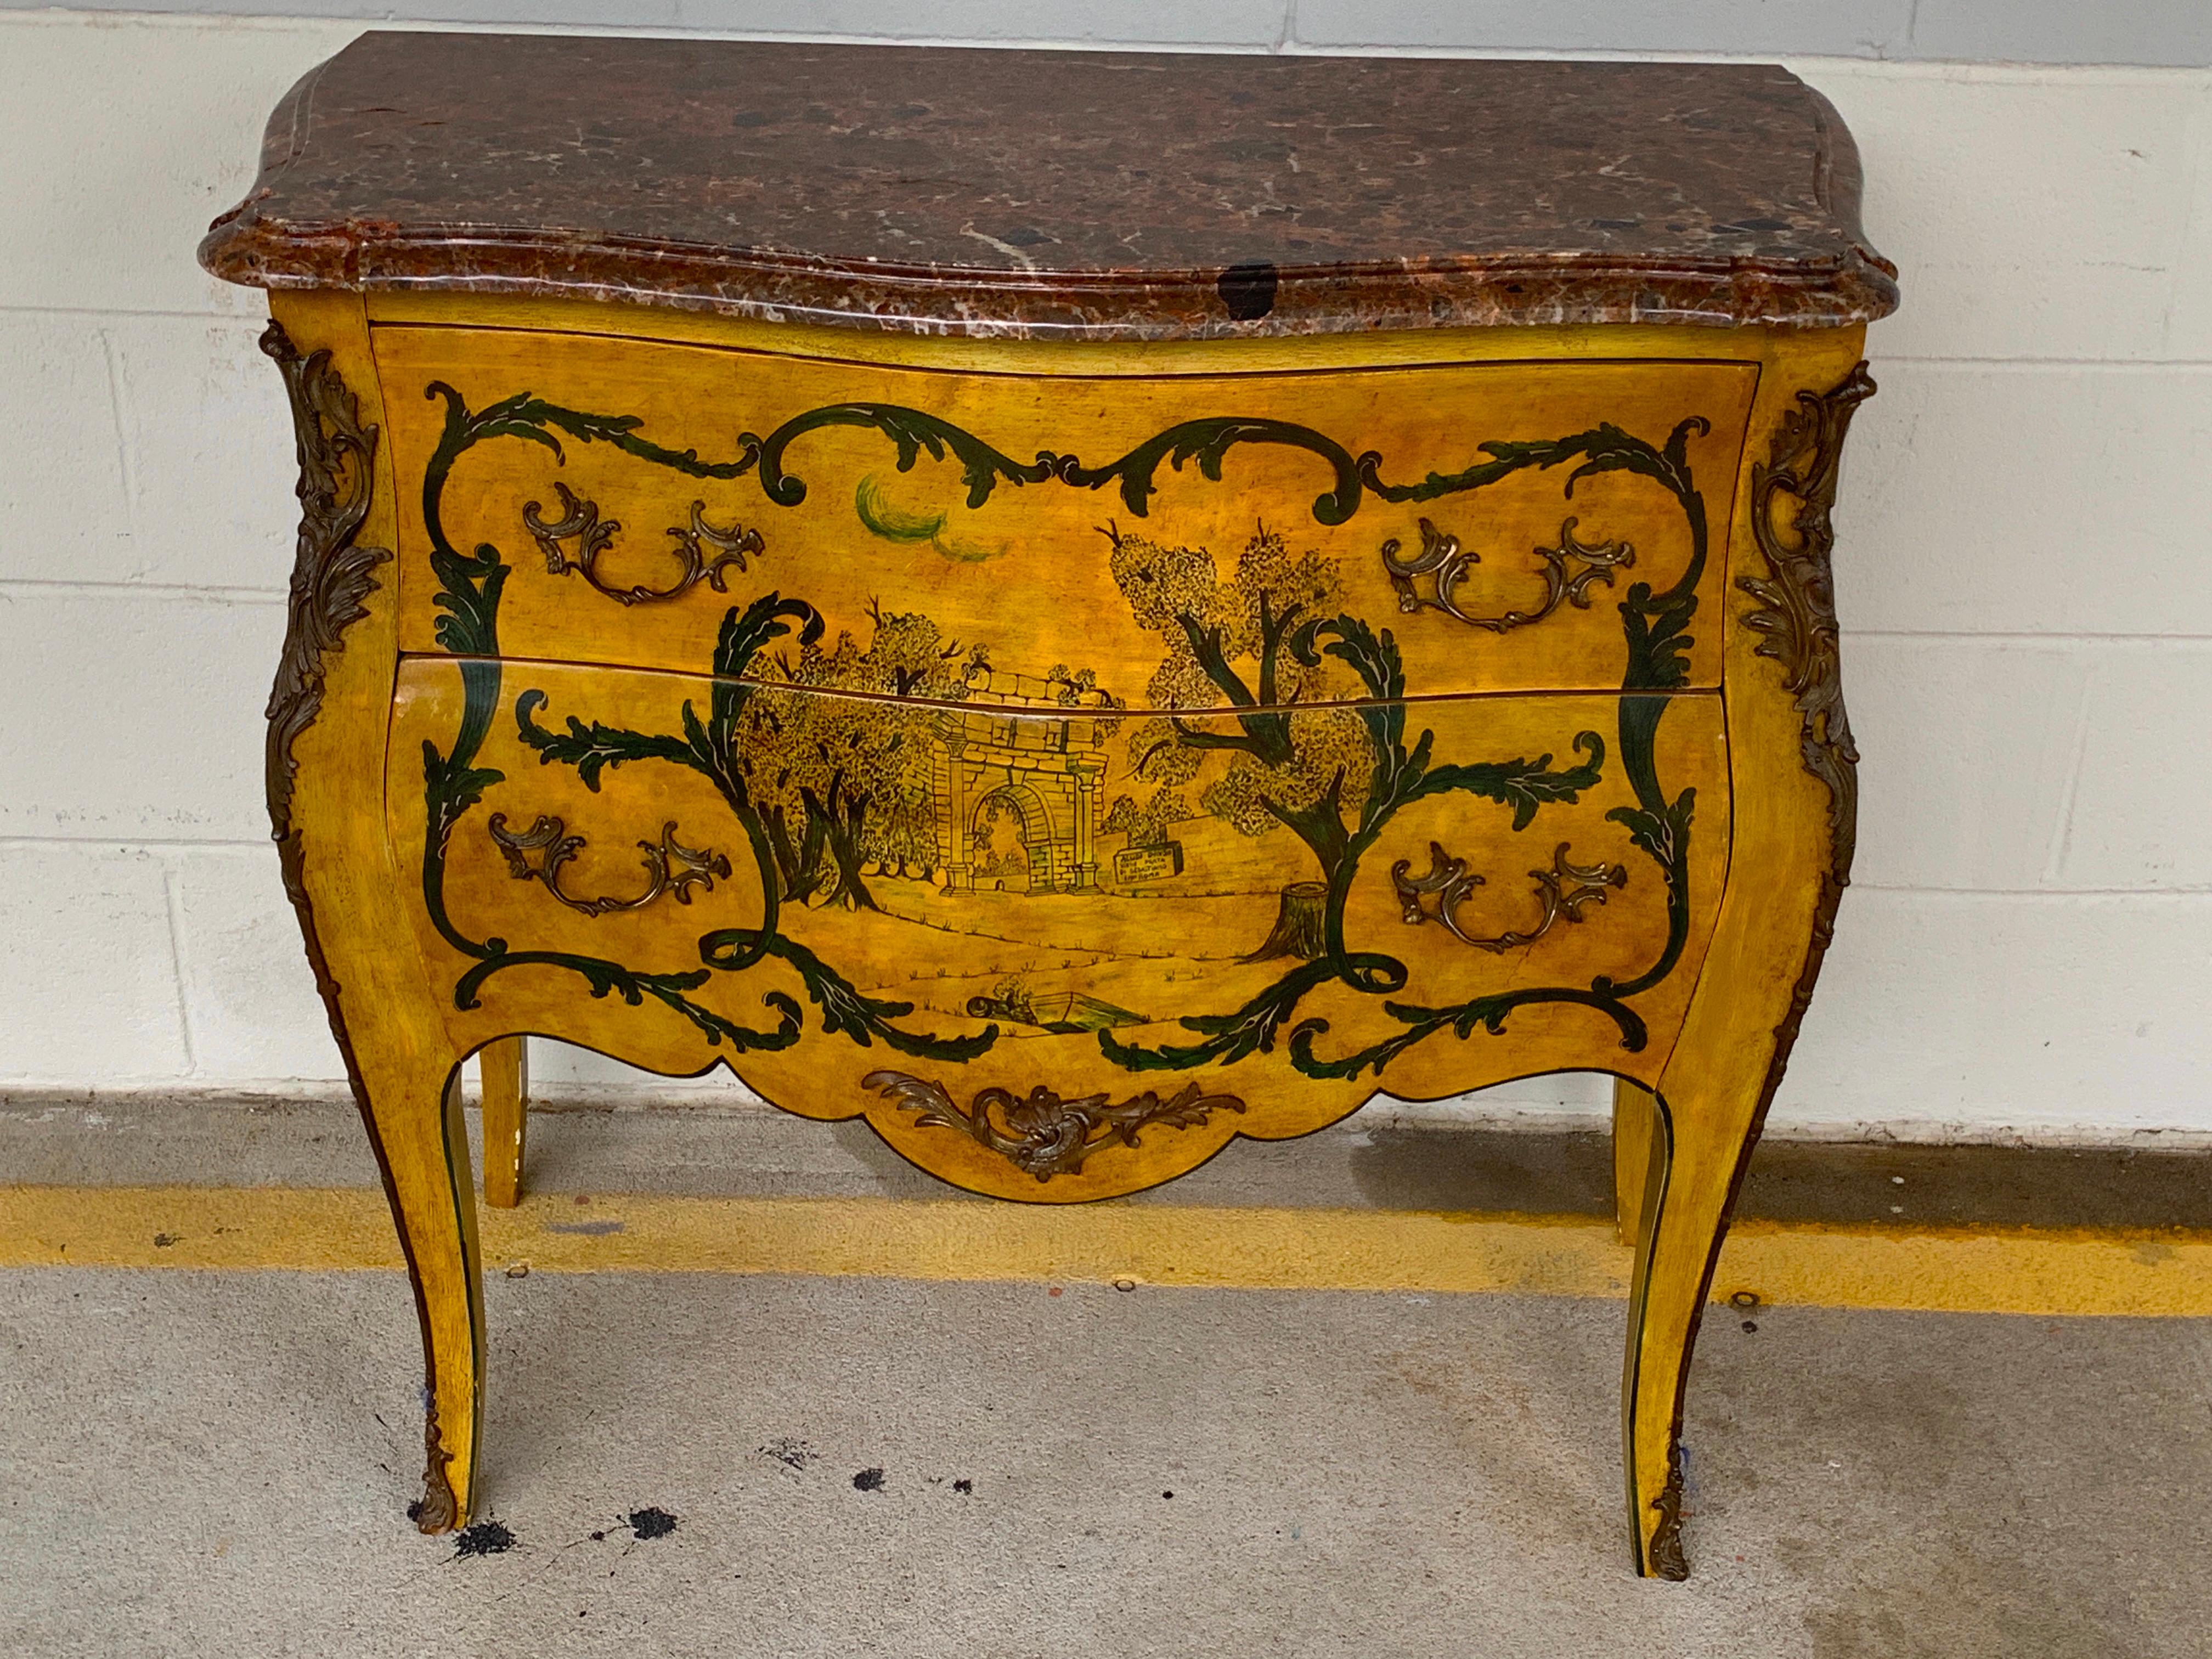 Fine Italian Piranesi topographical Polychromed marble top commode.
Painted with various views of Rome after Piranesi, with bronze hardware
inscribed 